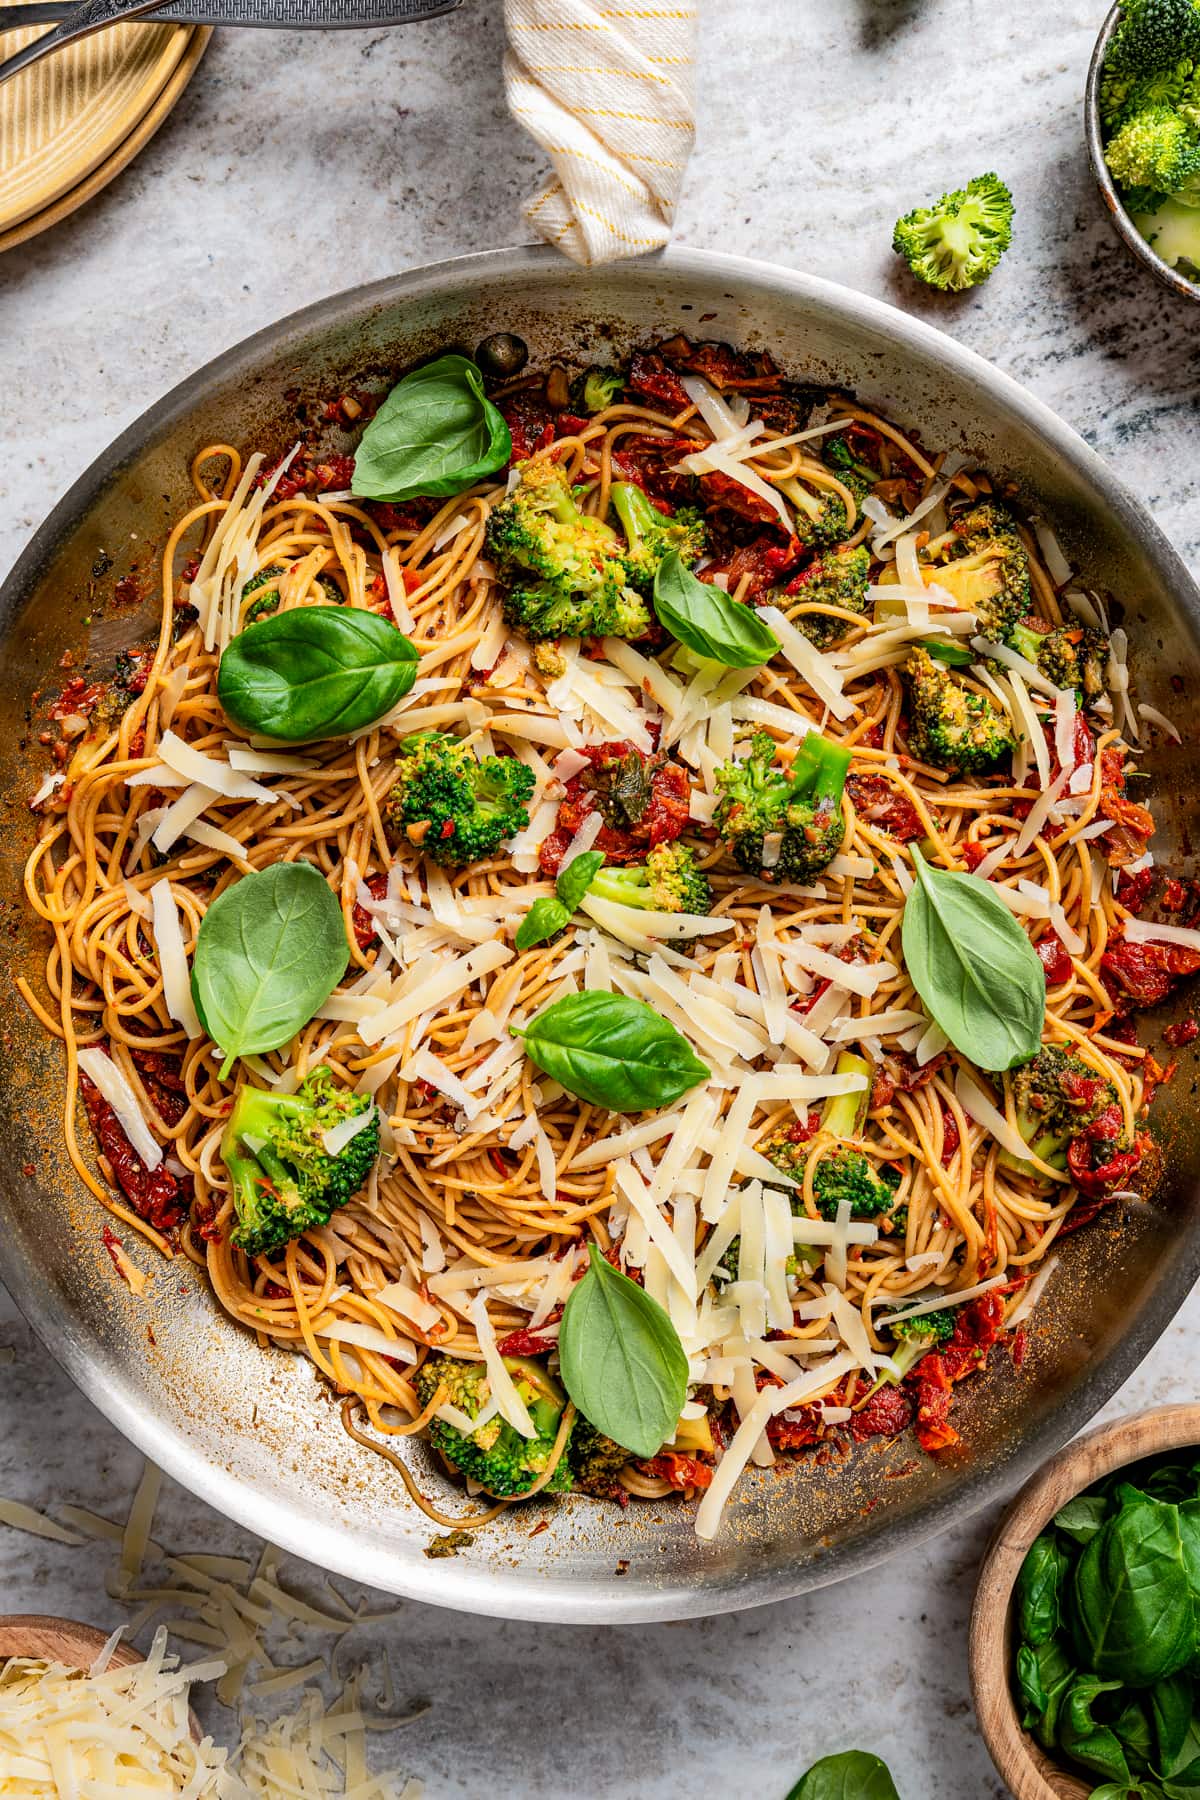 Pan with sun-dried tomatoes tossed with pasta, parmesan cheese, and fresh basil.